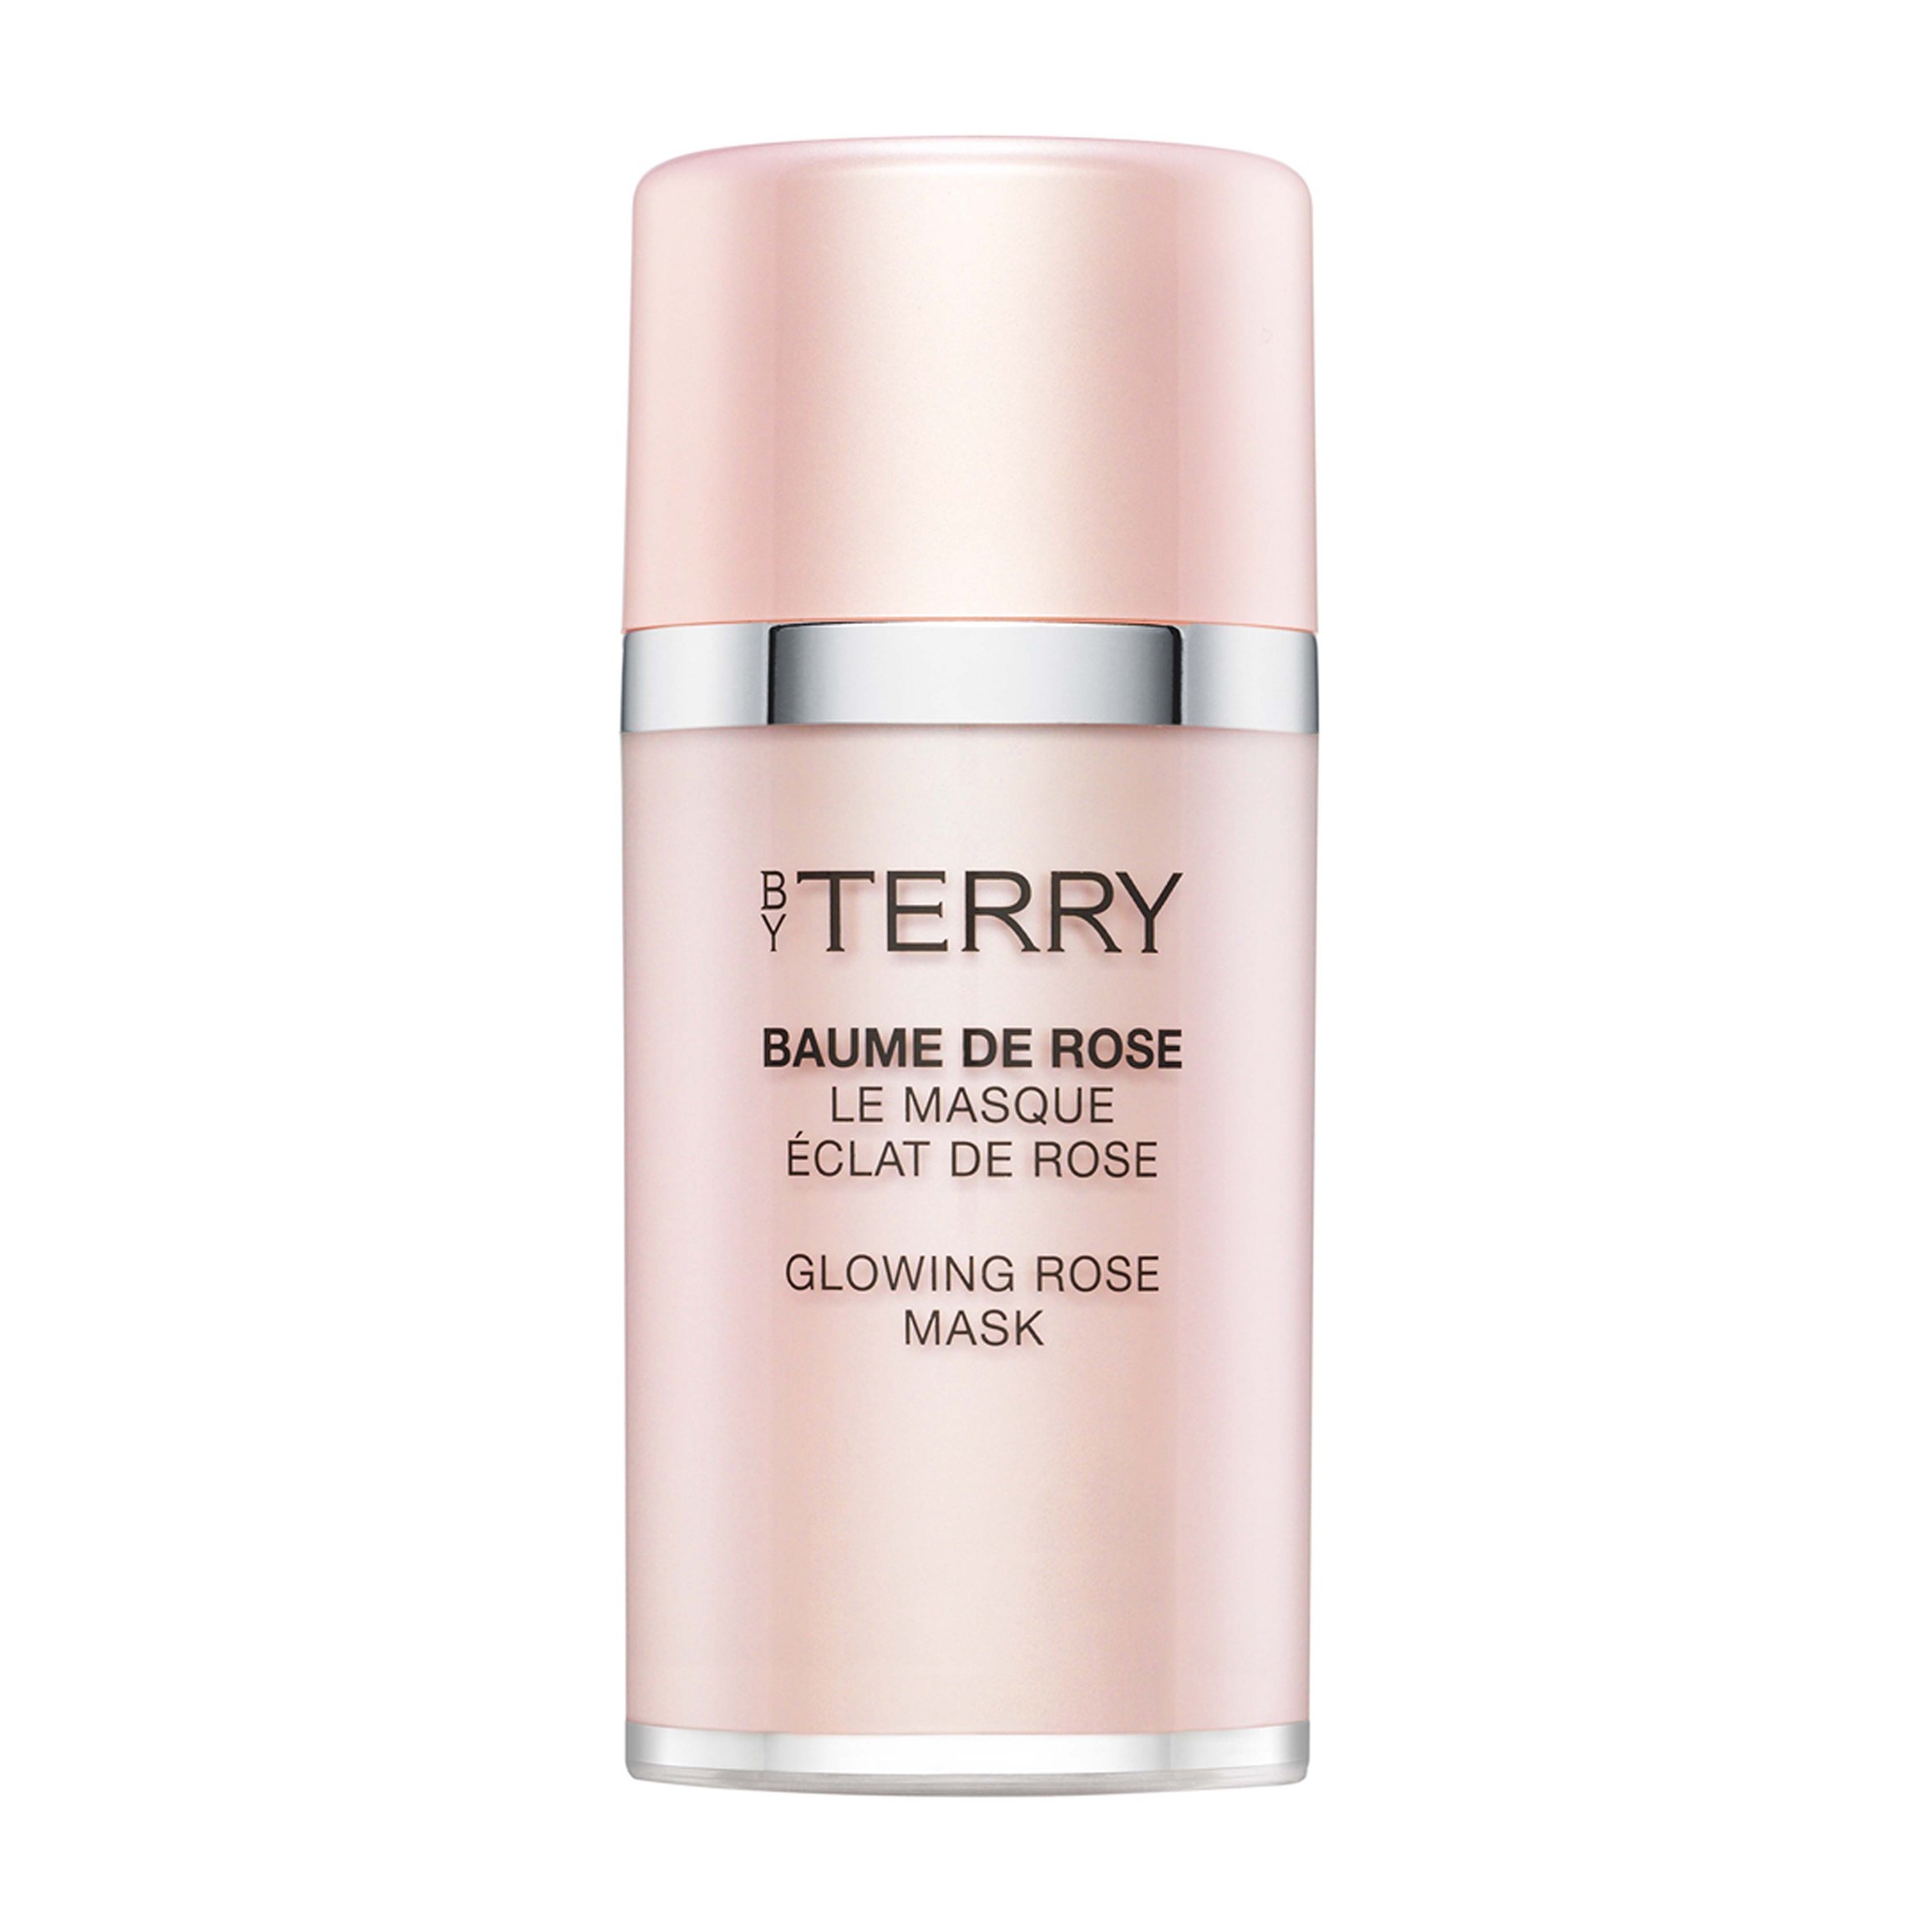 By Terry Baume de Rose Glowing Mask 50 g